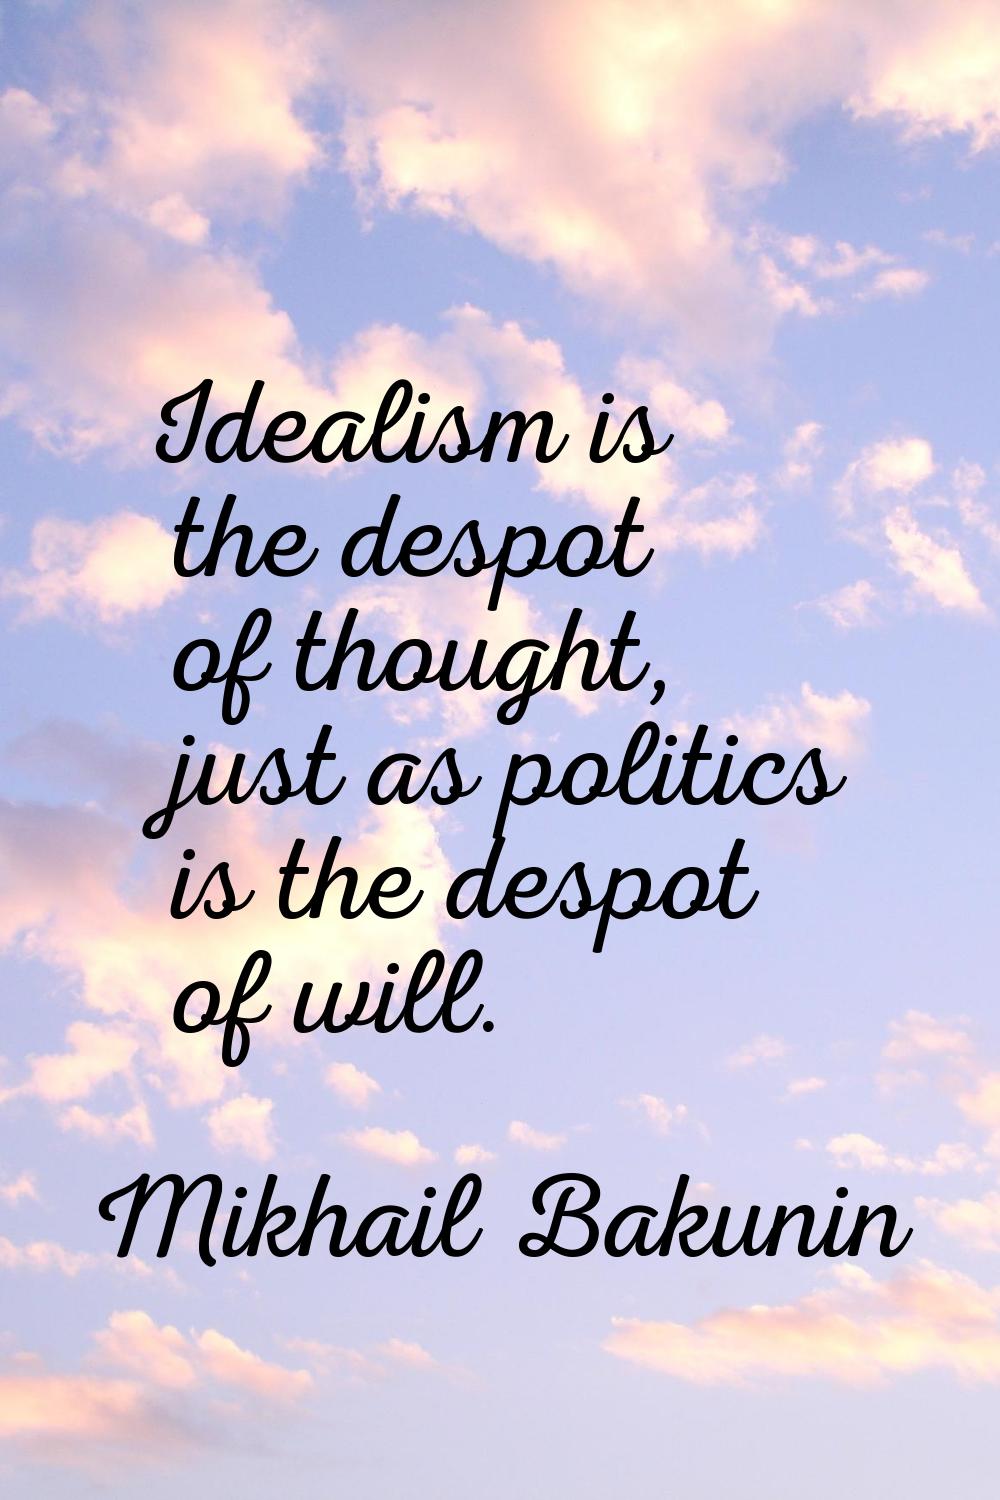 Idealism is the despot of thought, just as politics is the despot of will.